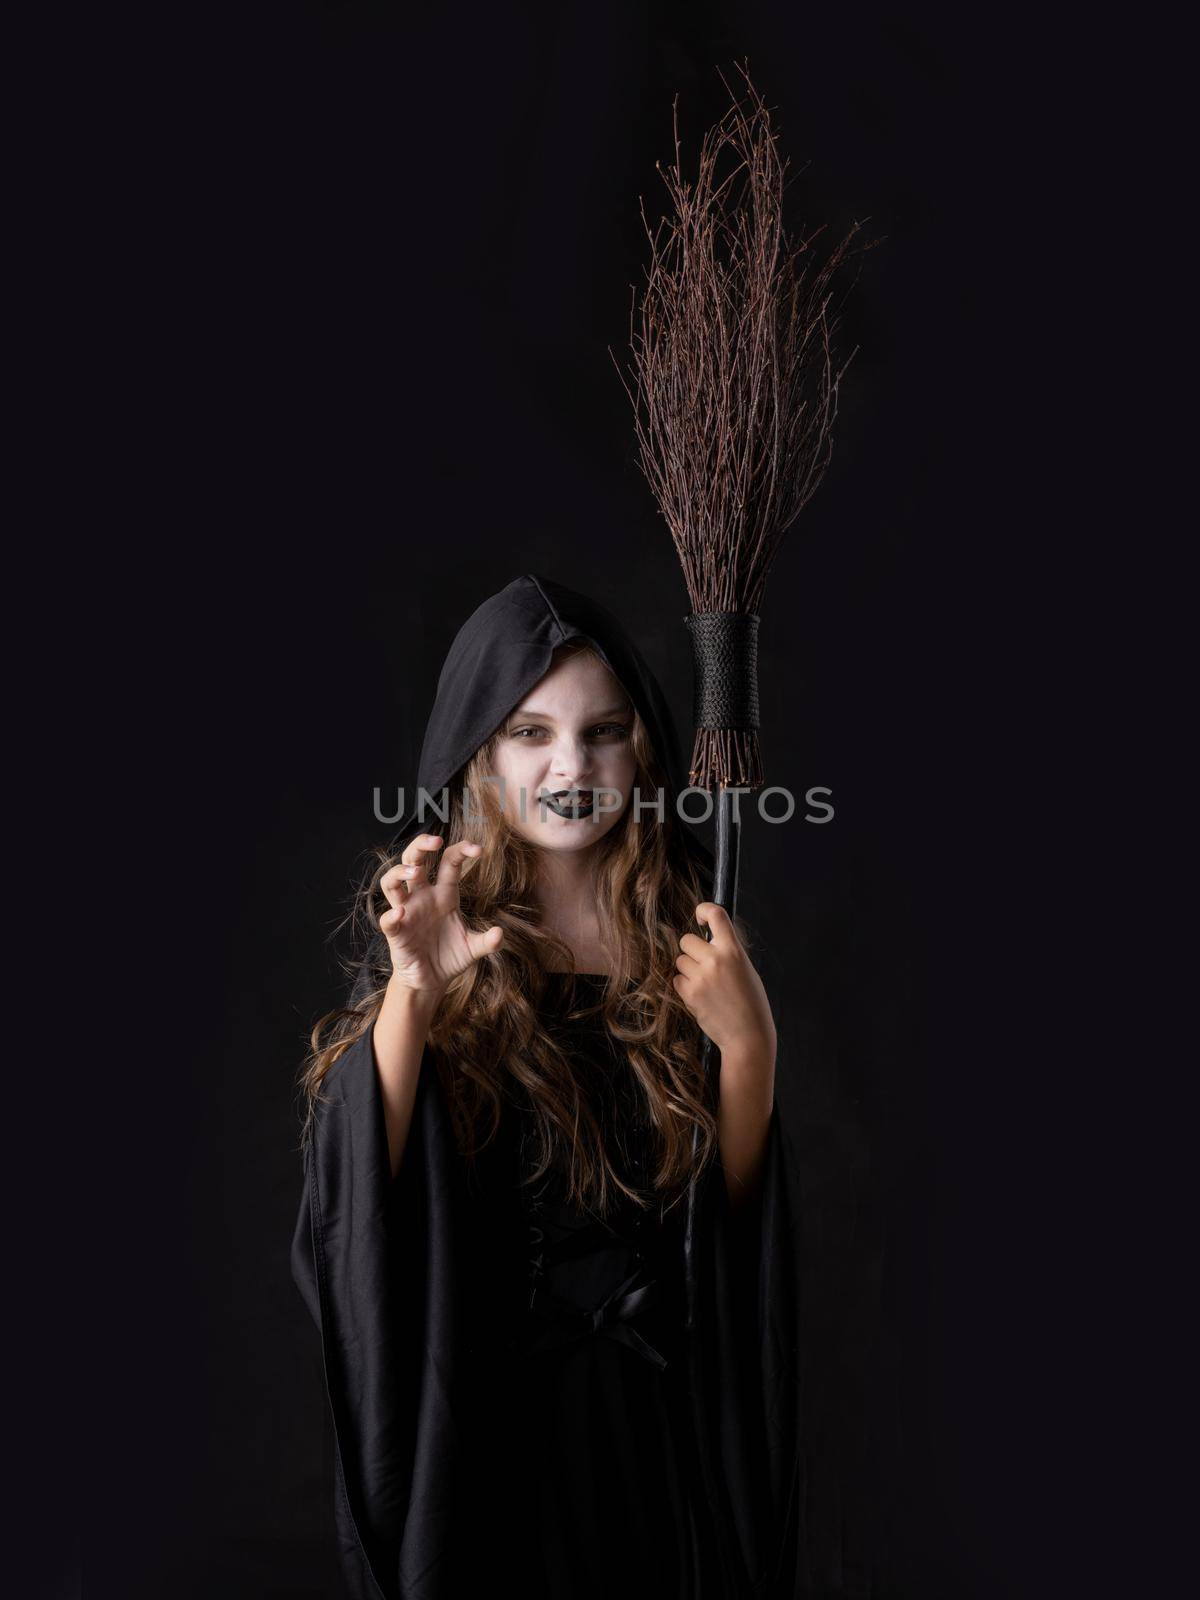 Girl in halloween evil angry witch costume grin snarl hold broom isolated on black background